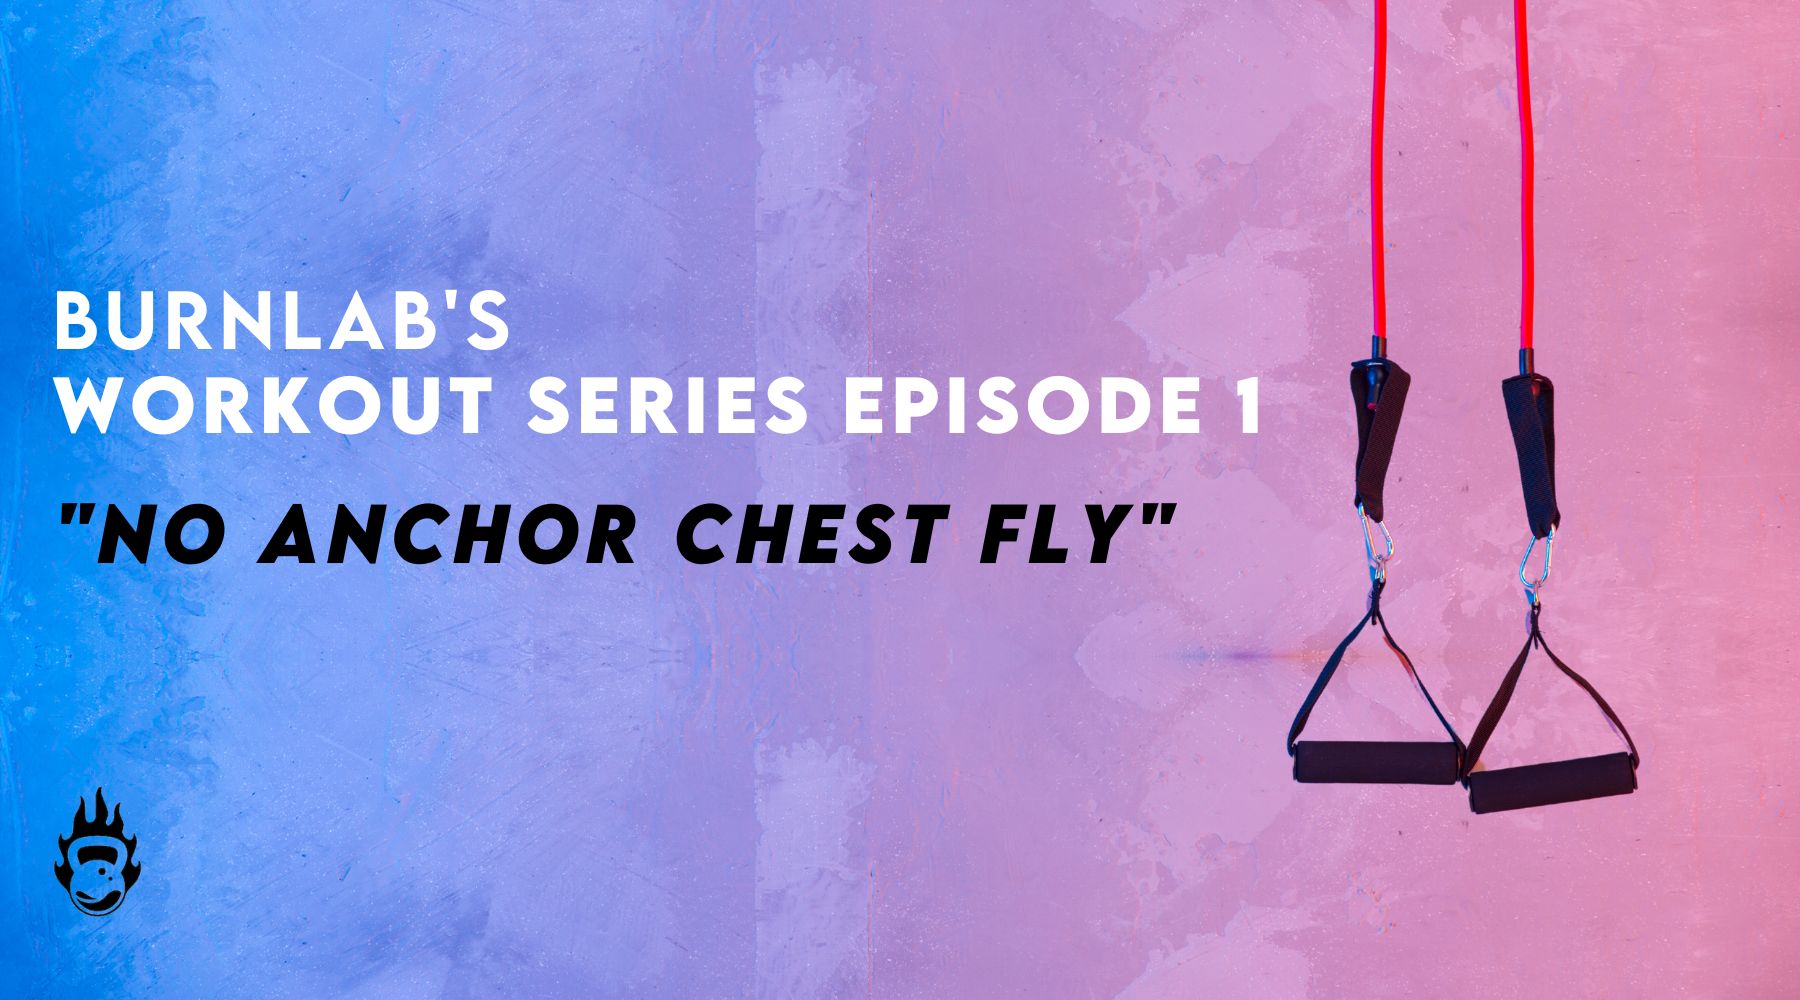 No anchor chest fly banner